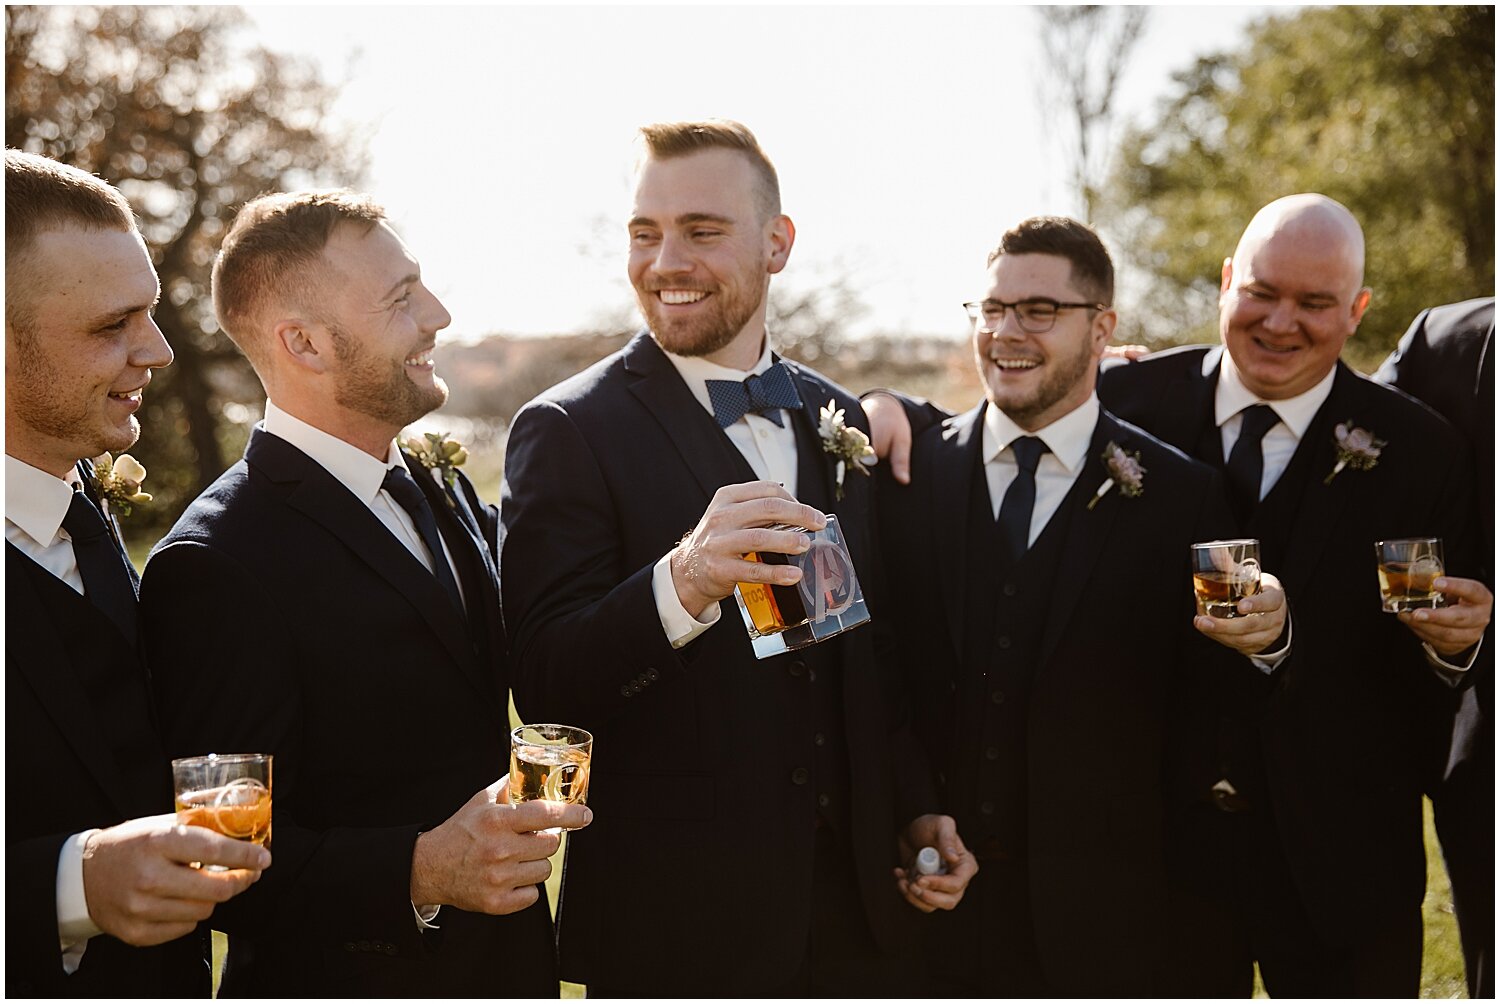  groom and groomsmen drinking before the wedding ceremony 